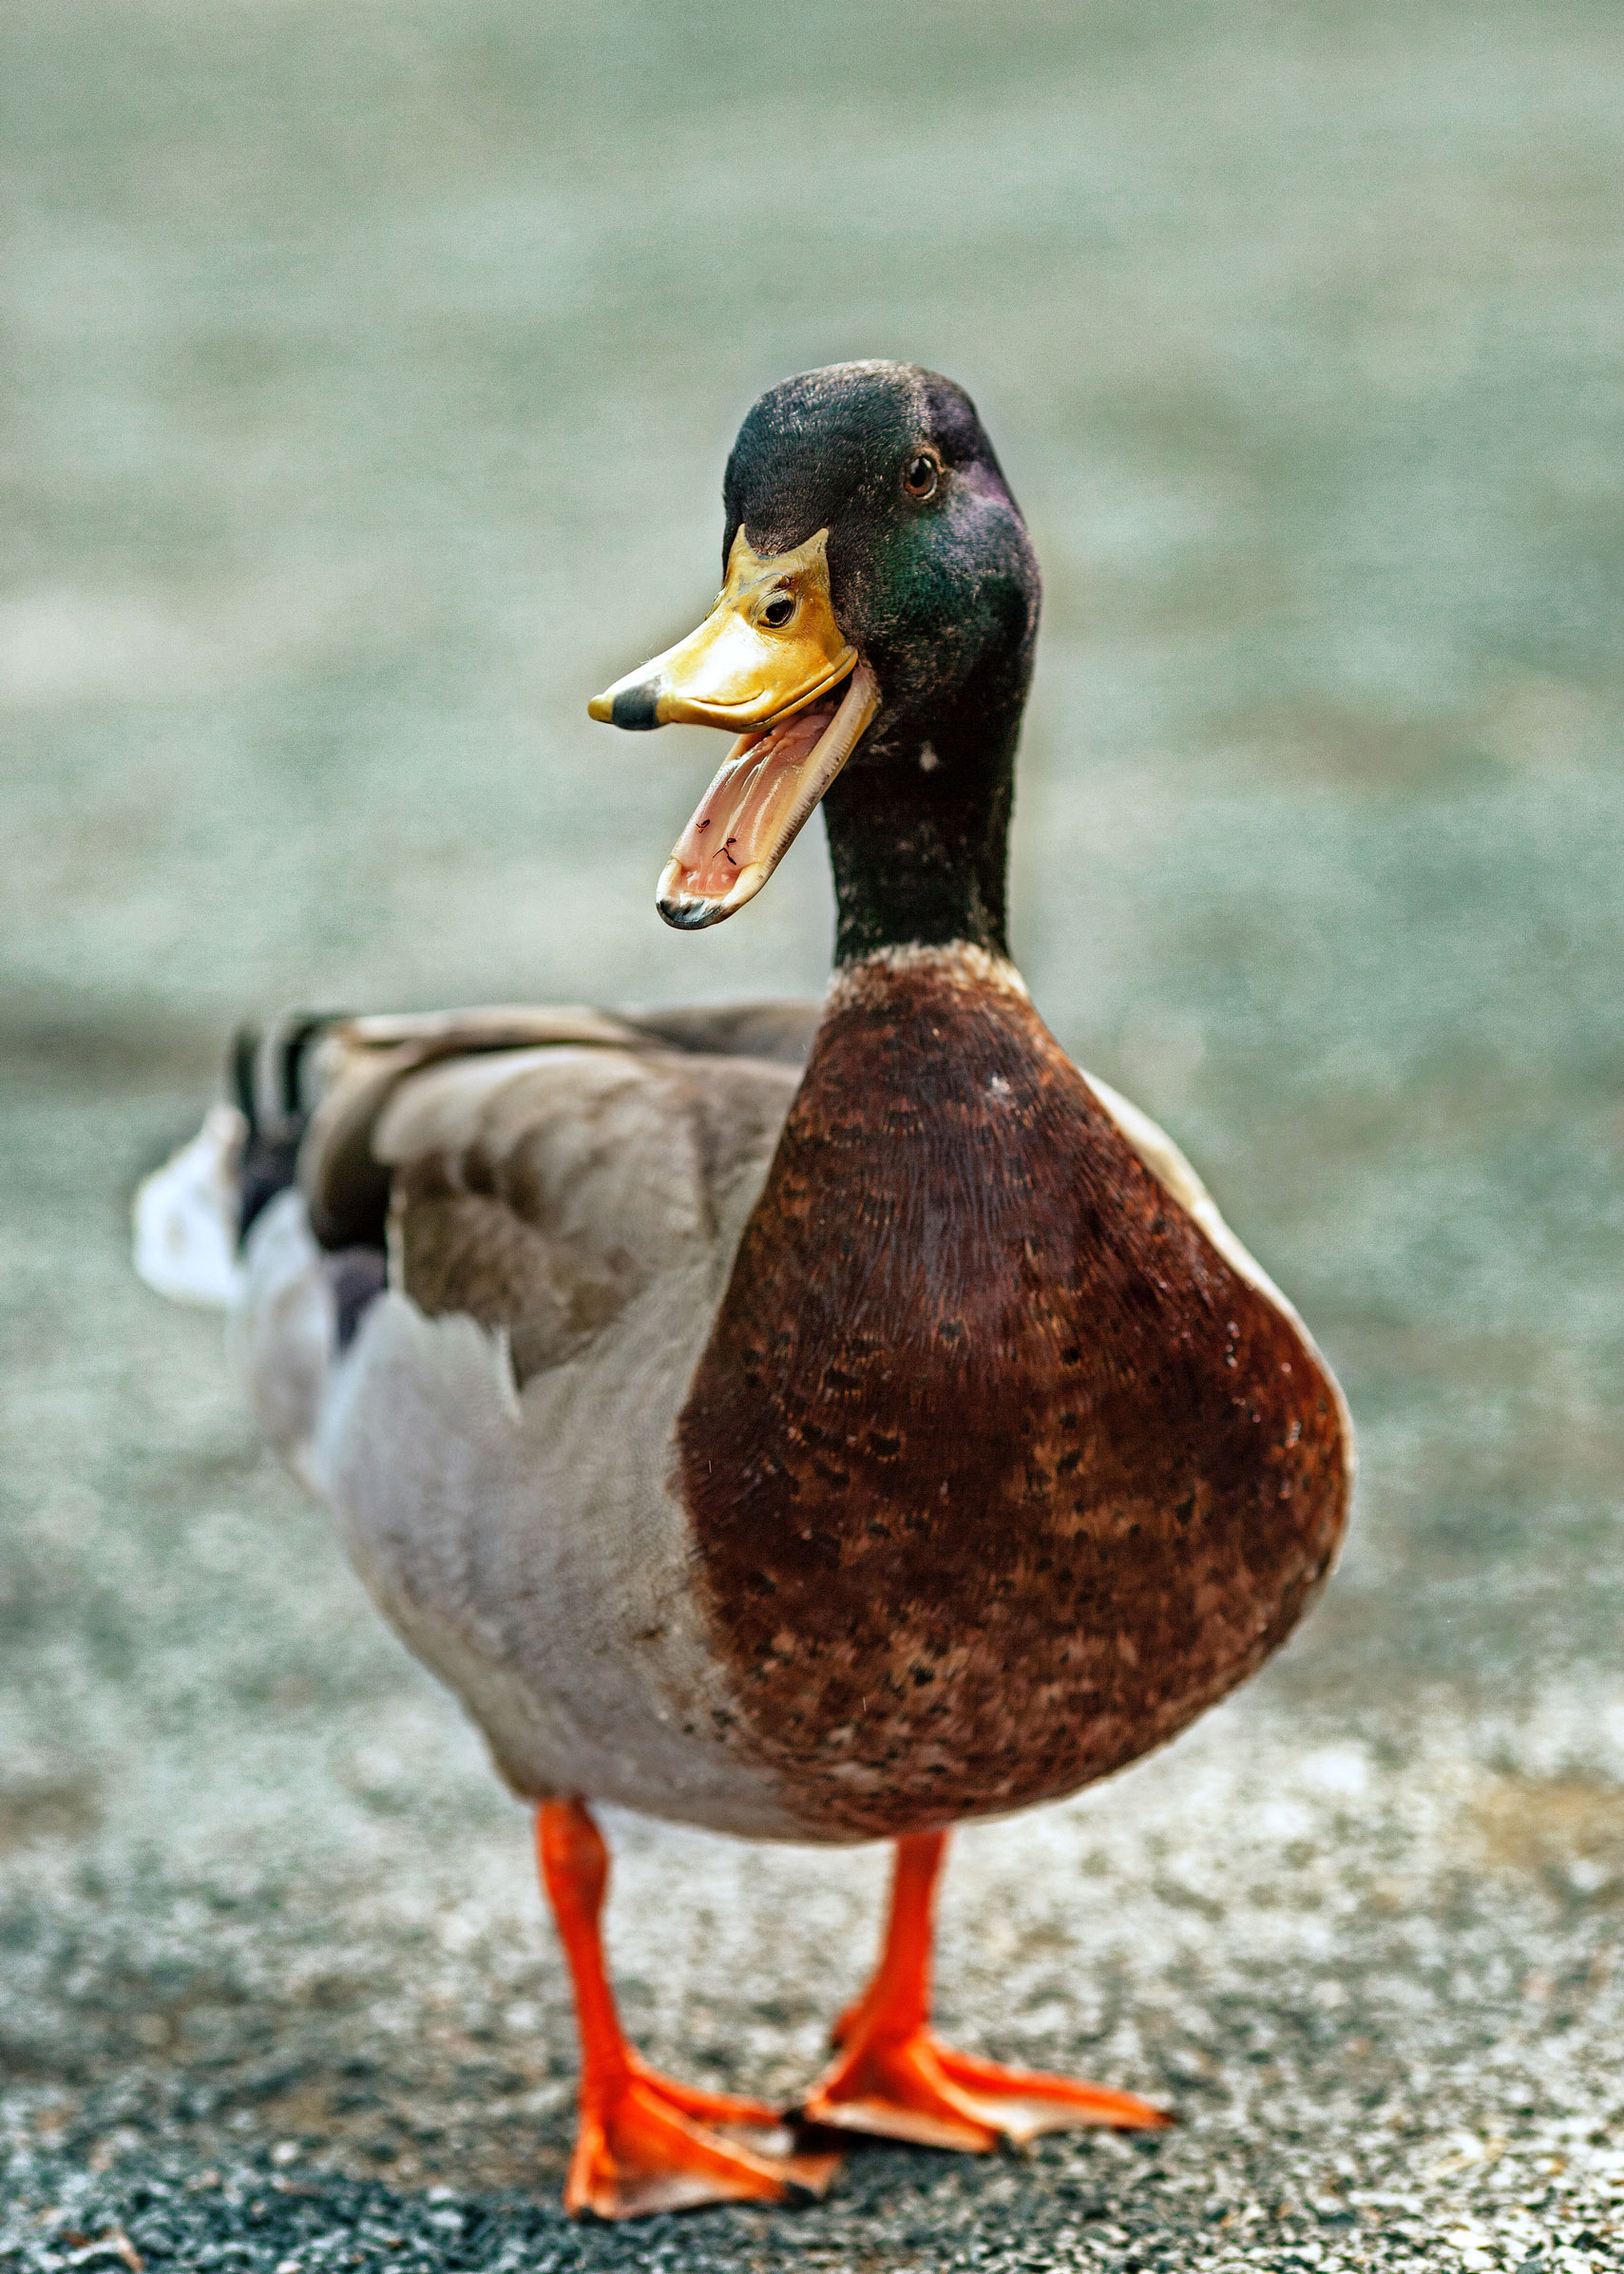 This is a duck. Ducks go 'quack', and remind me of Byram Bridle.